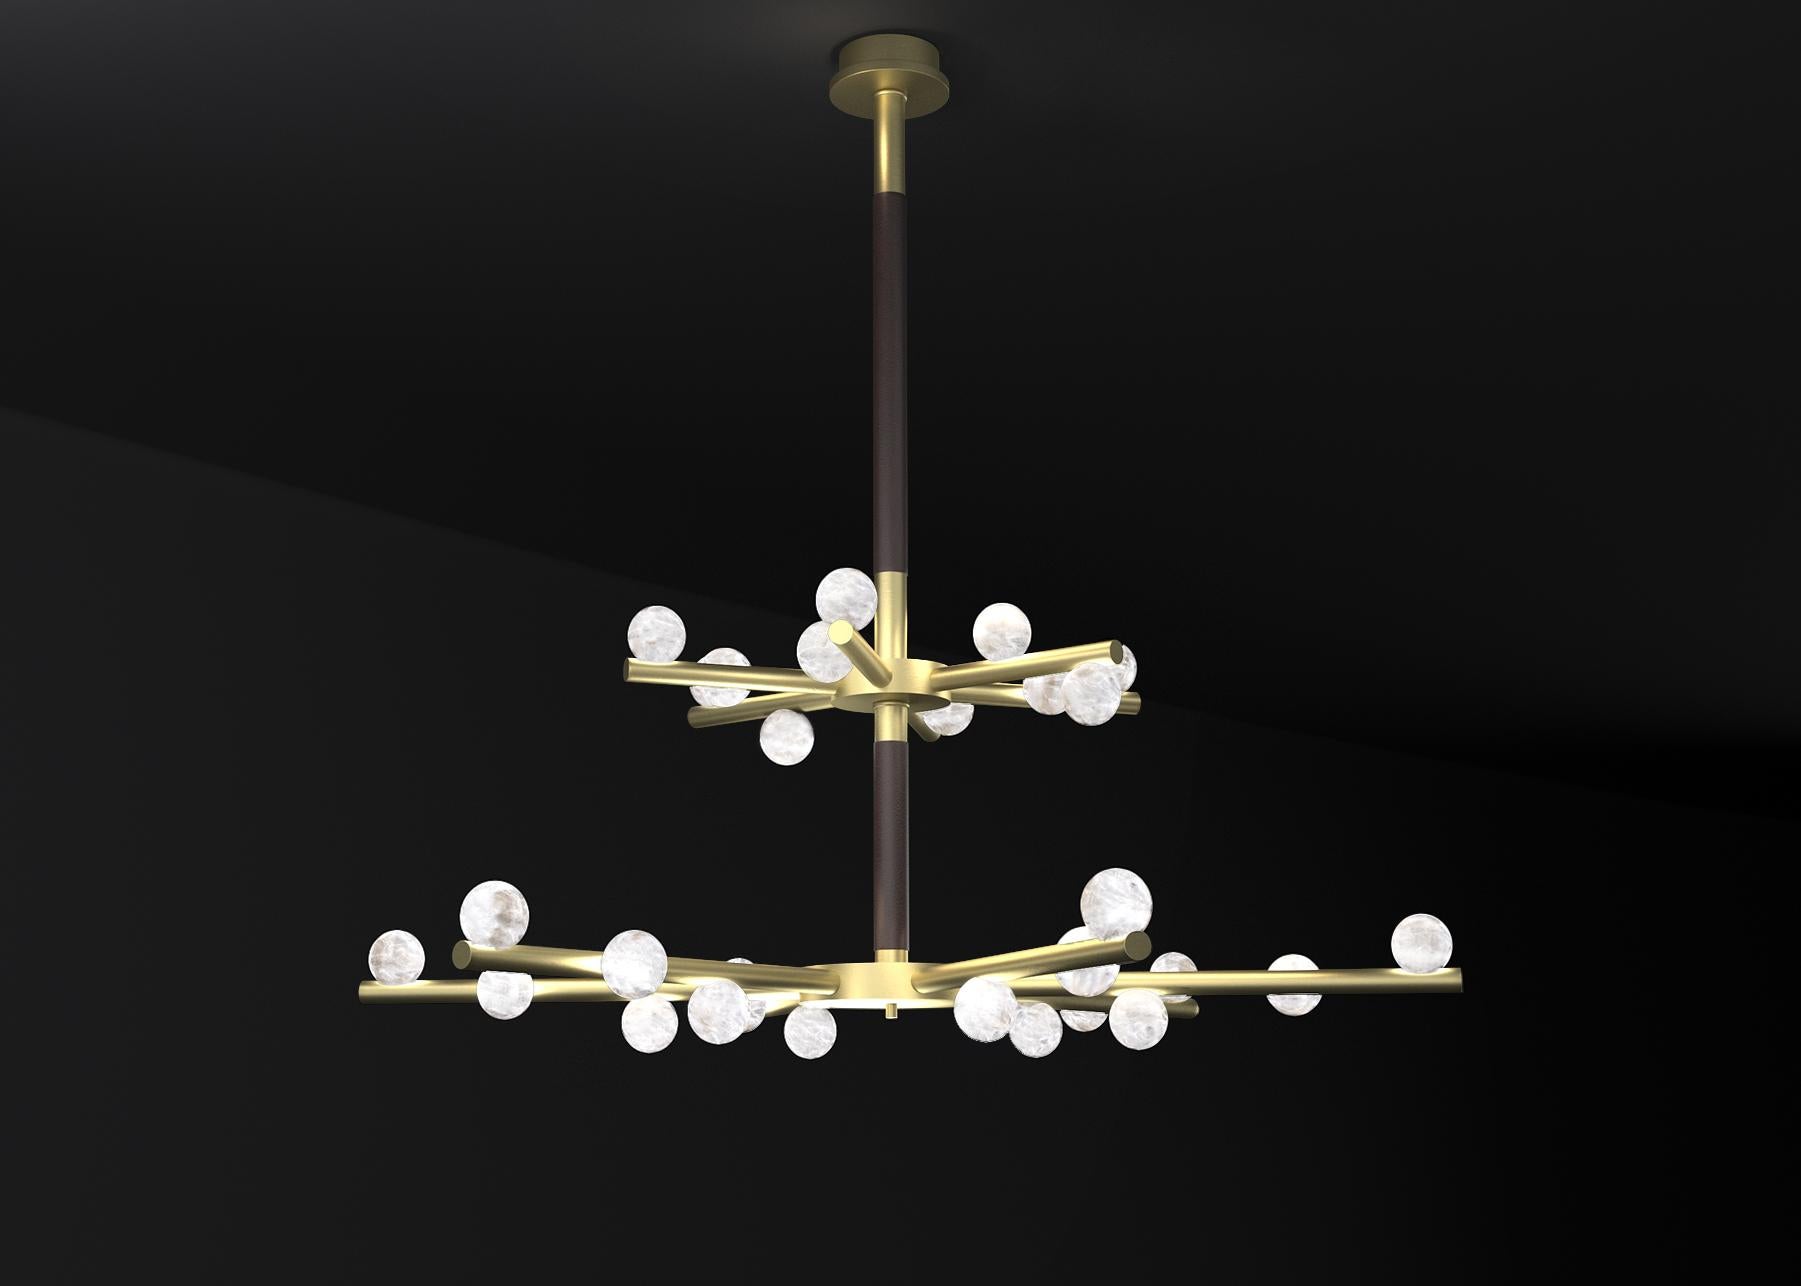 Demetra Brushed Brass Double Chandelier by Alabastro Italiano
Dimensions: D 85 x W 97 x H 96 cm.
Materials: White alabaster, brushed brass and leather.

Available in different finishes: Shiny Silver, Bronze, Brushed Brass, Ruggine of Florence,